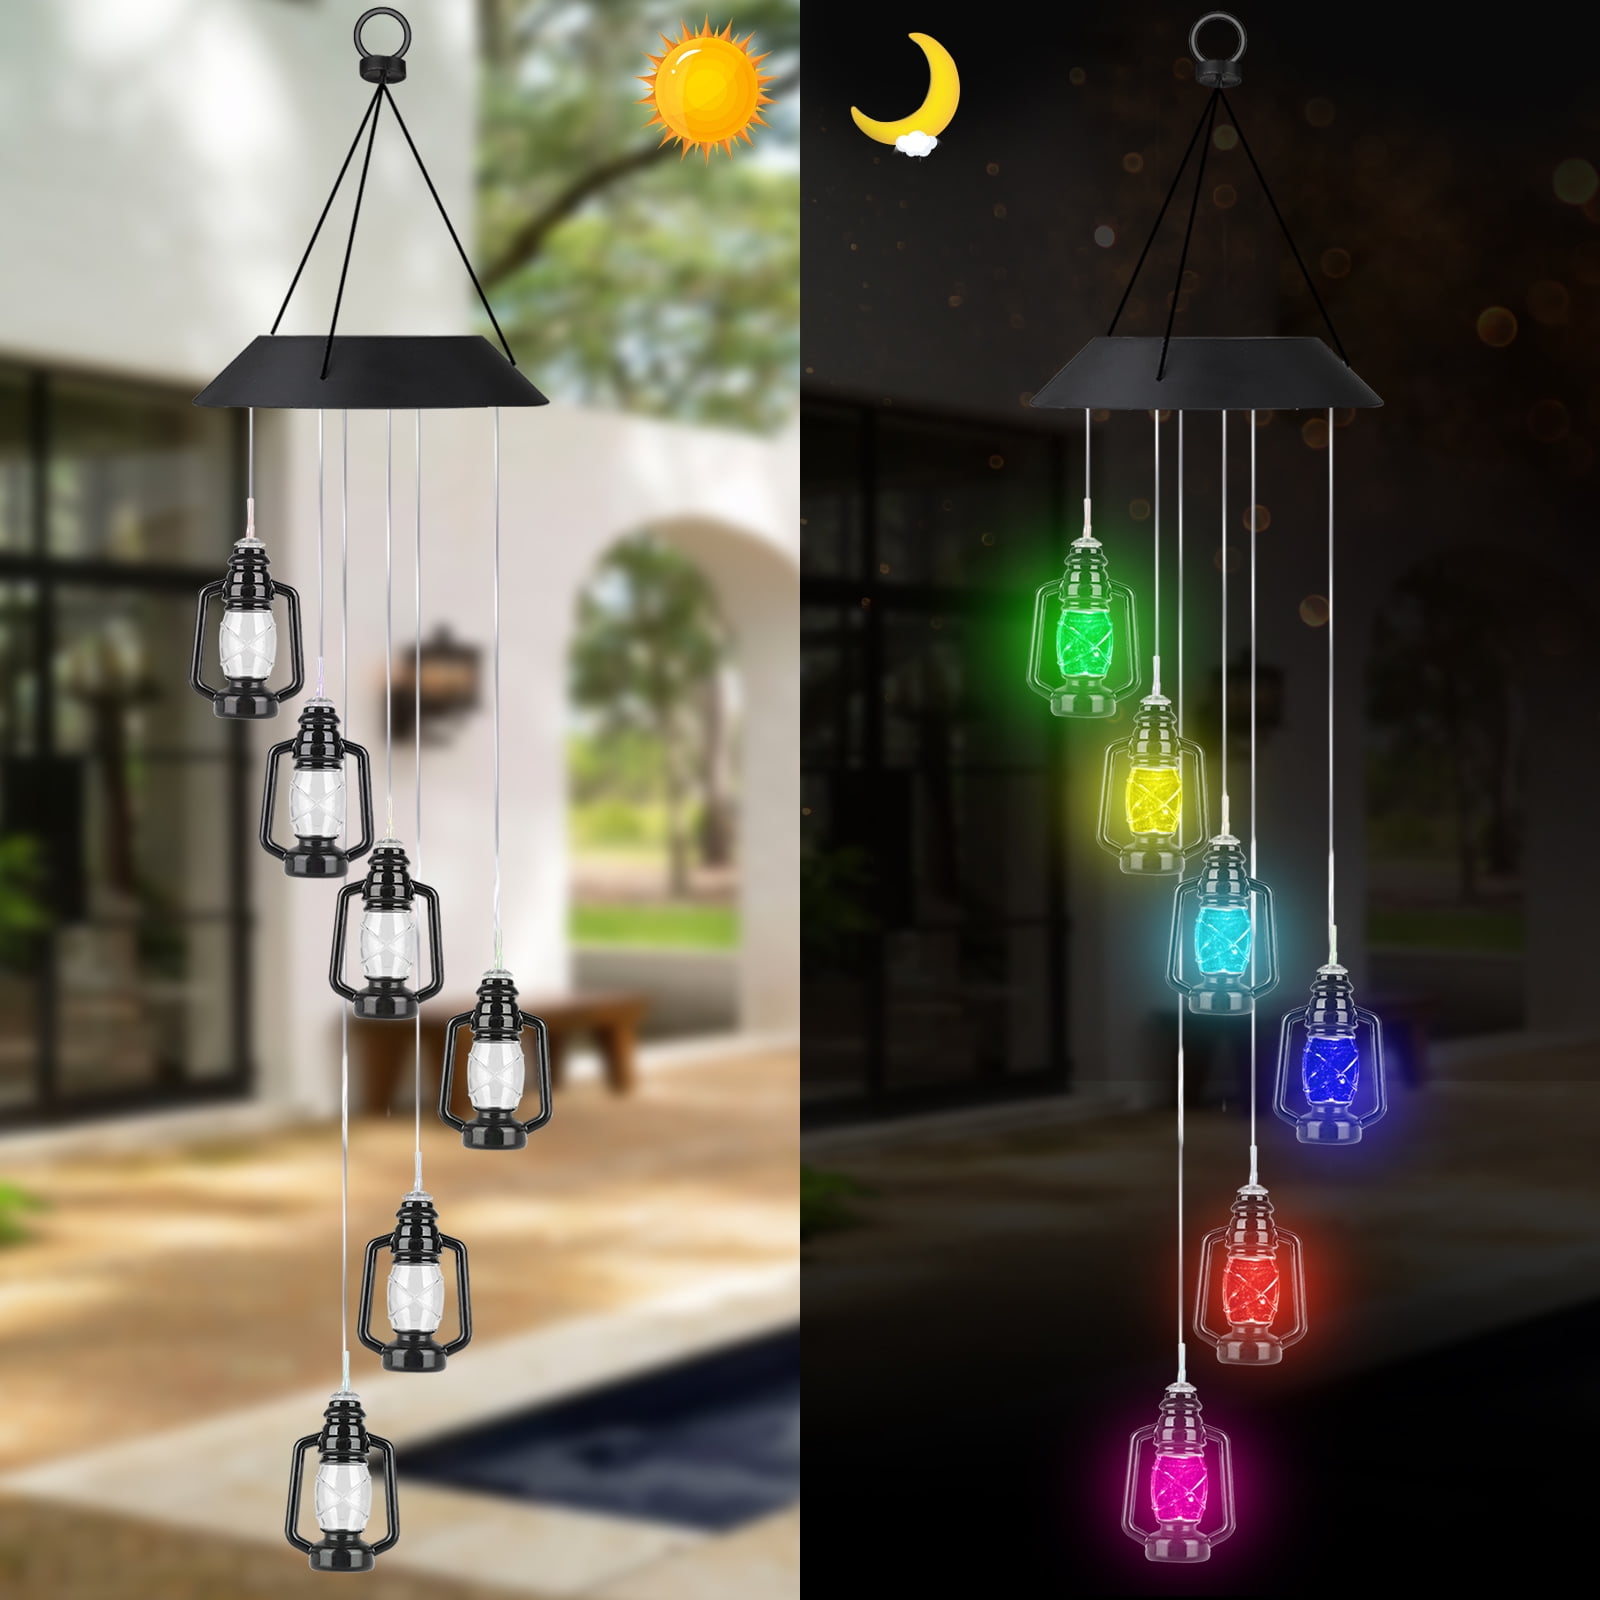 LED Six Stars Wind Chime Solar Powered Lights Color-Changing Yard Garden Decor 